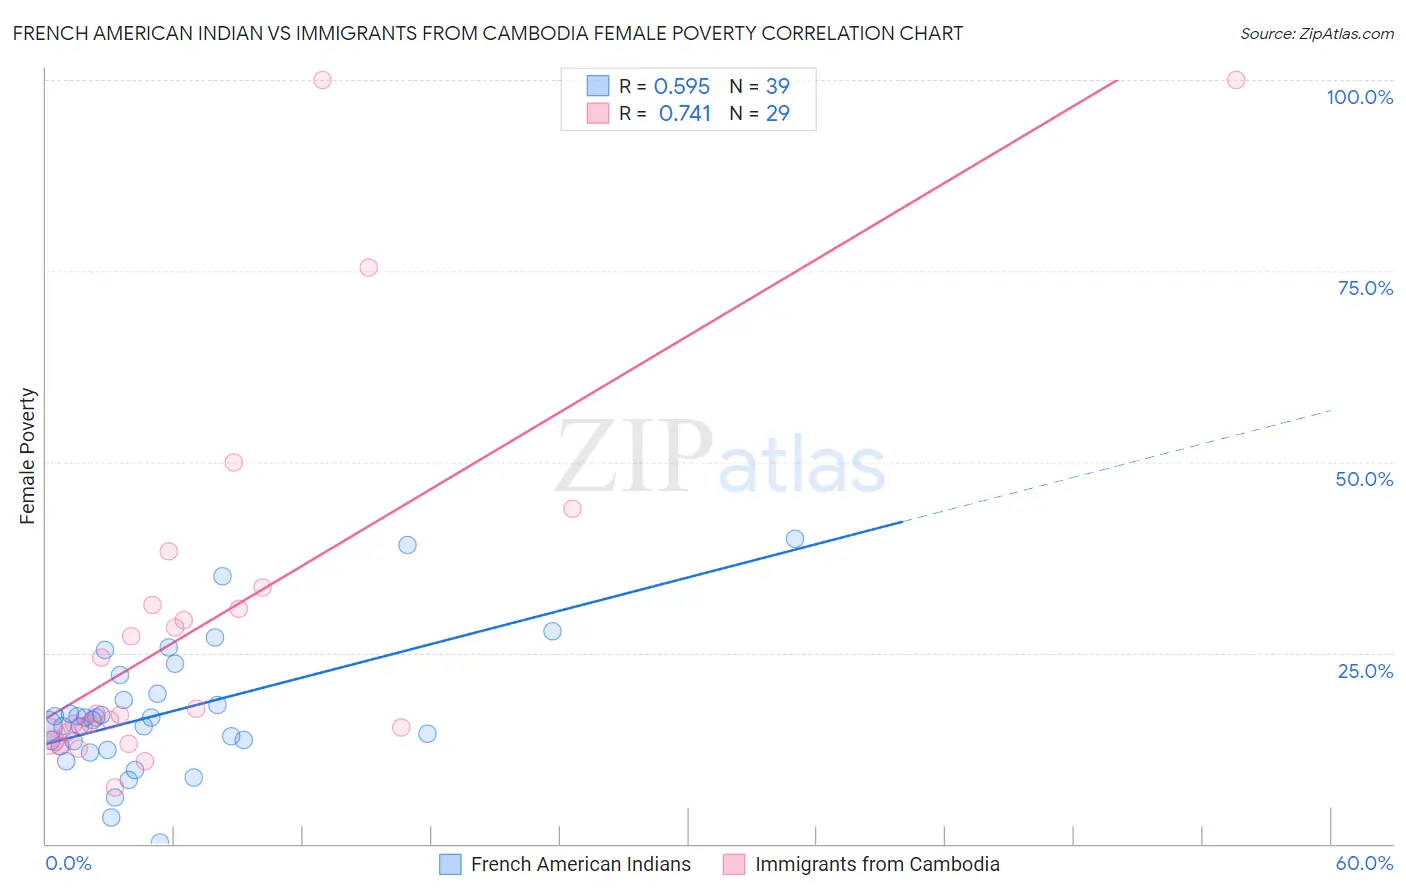 French American Indian vs Immigrants from Cambodia Female Poverty